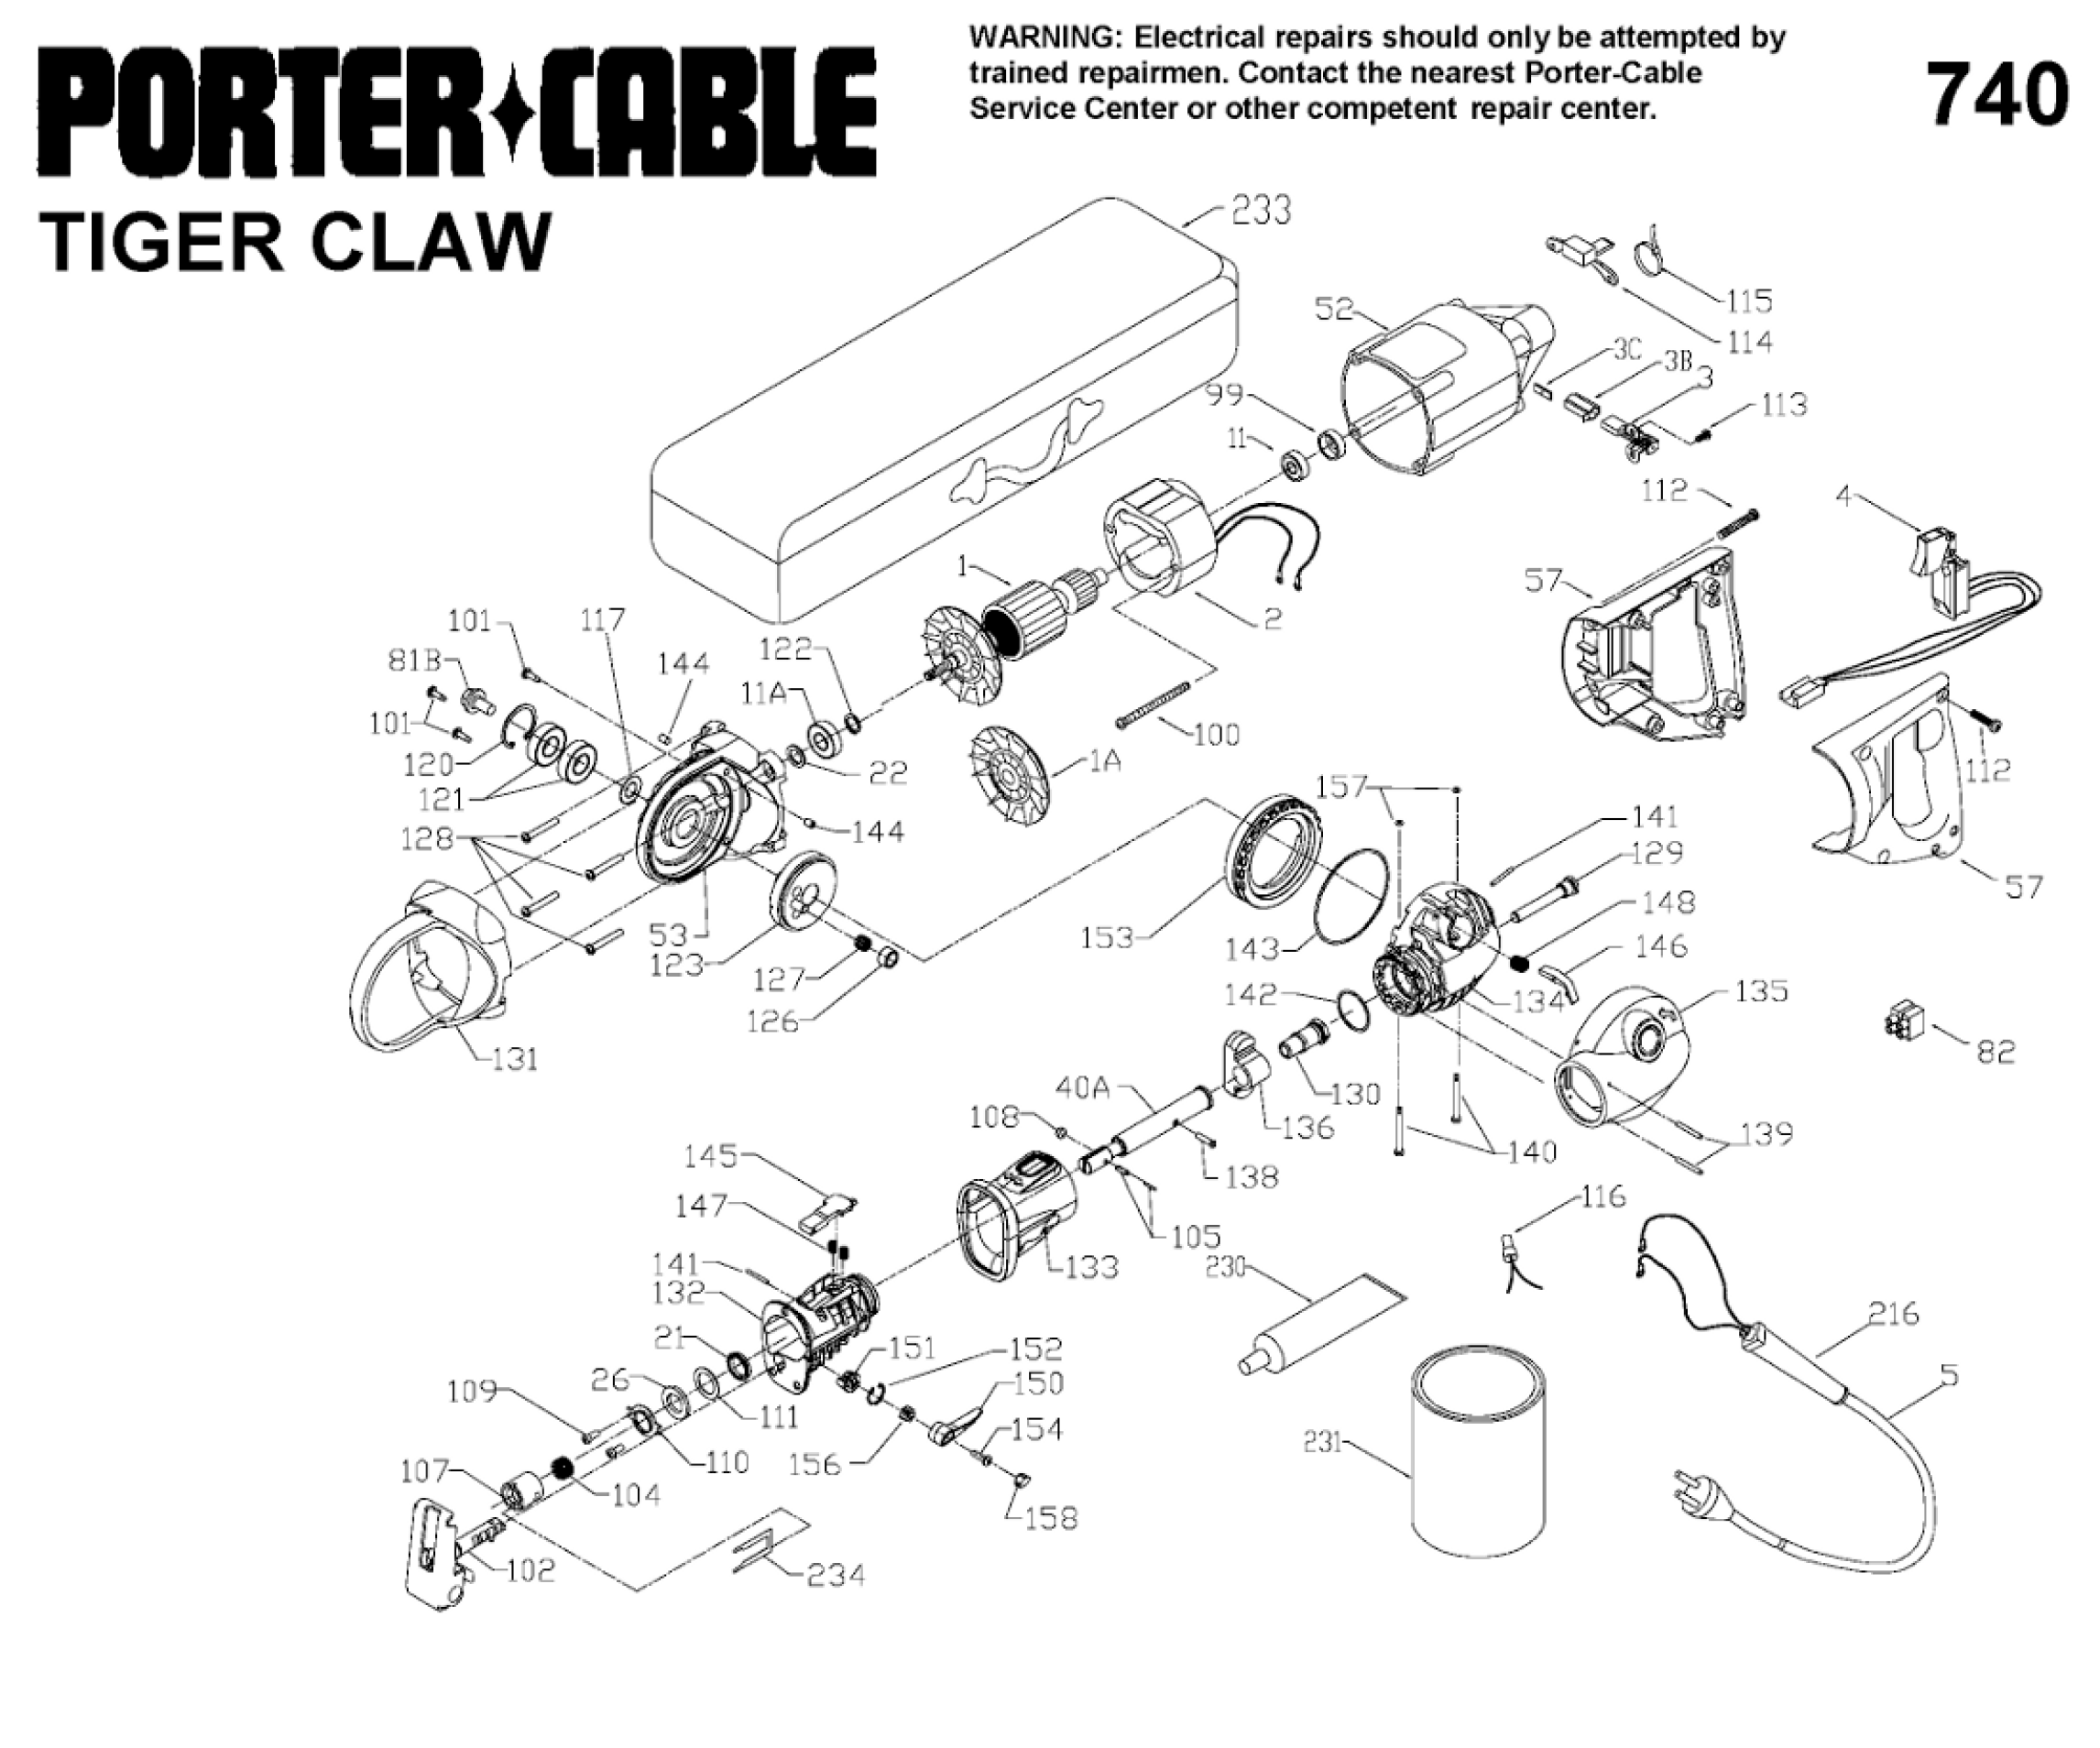 porter cable table saw parts